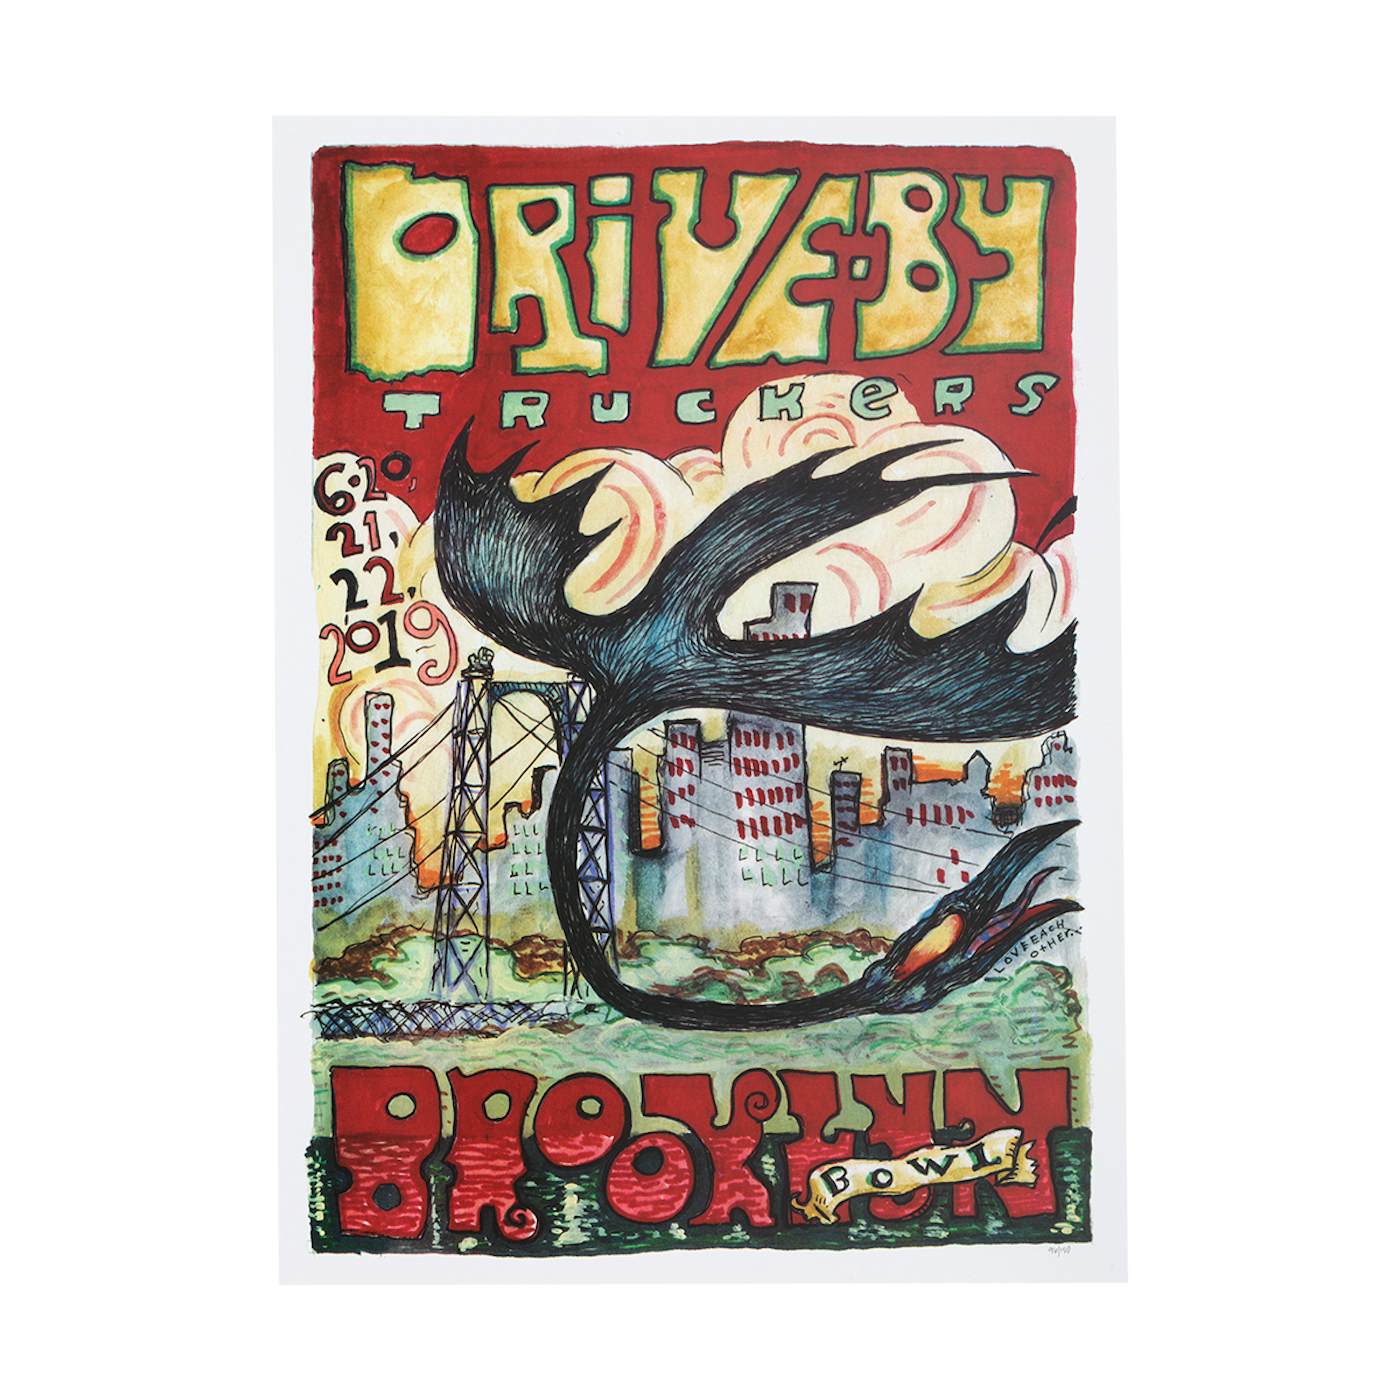 Drive-By Truckers Brooklyn Bowl June 20-22 2019 Poster